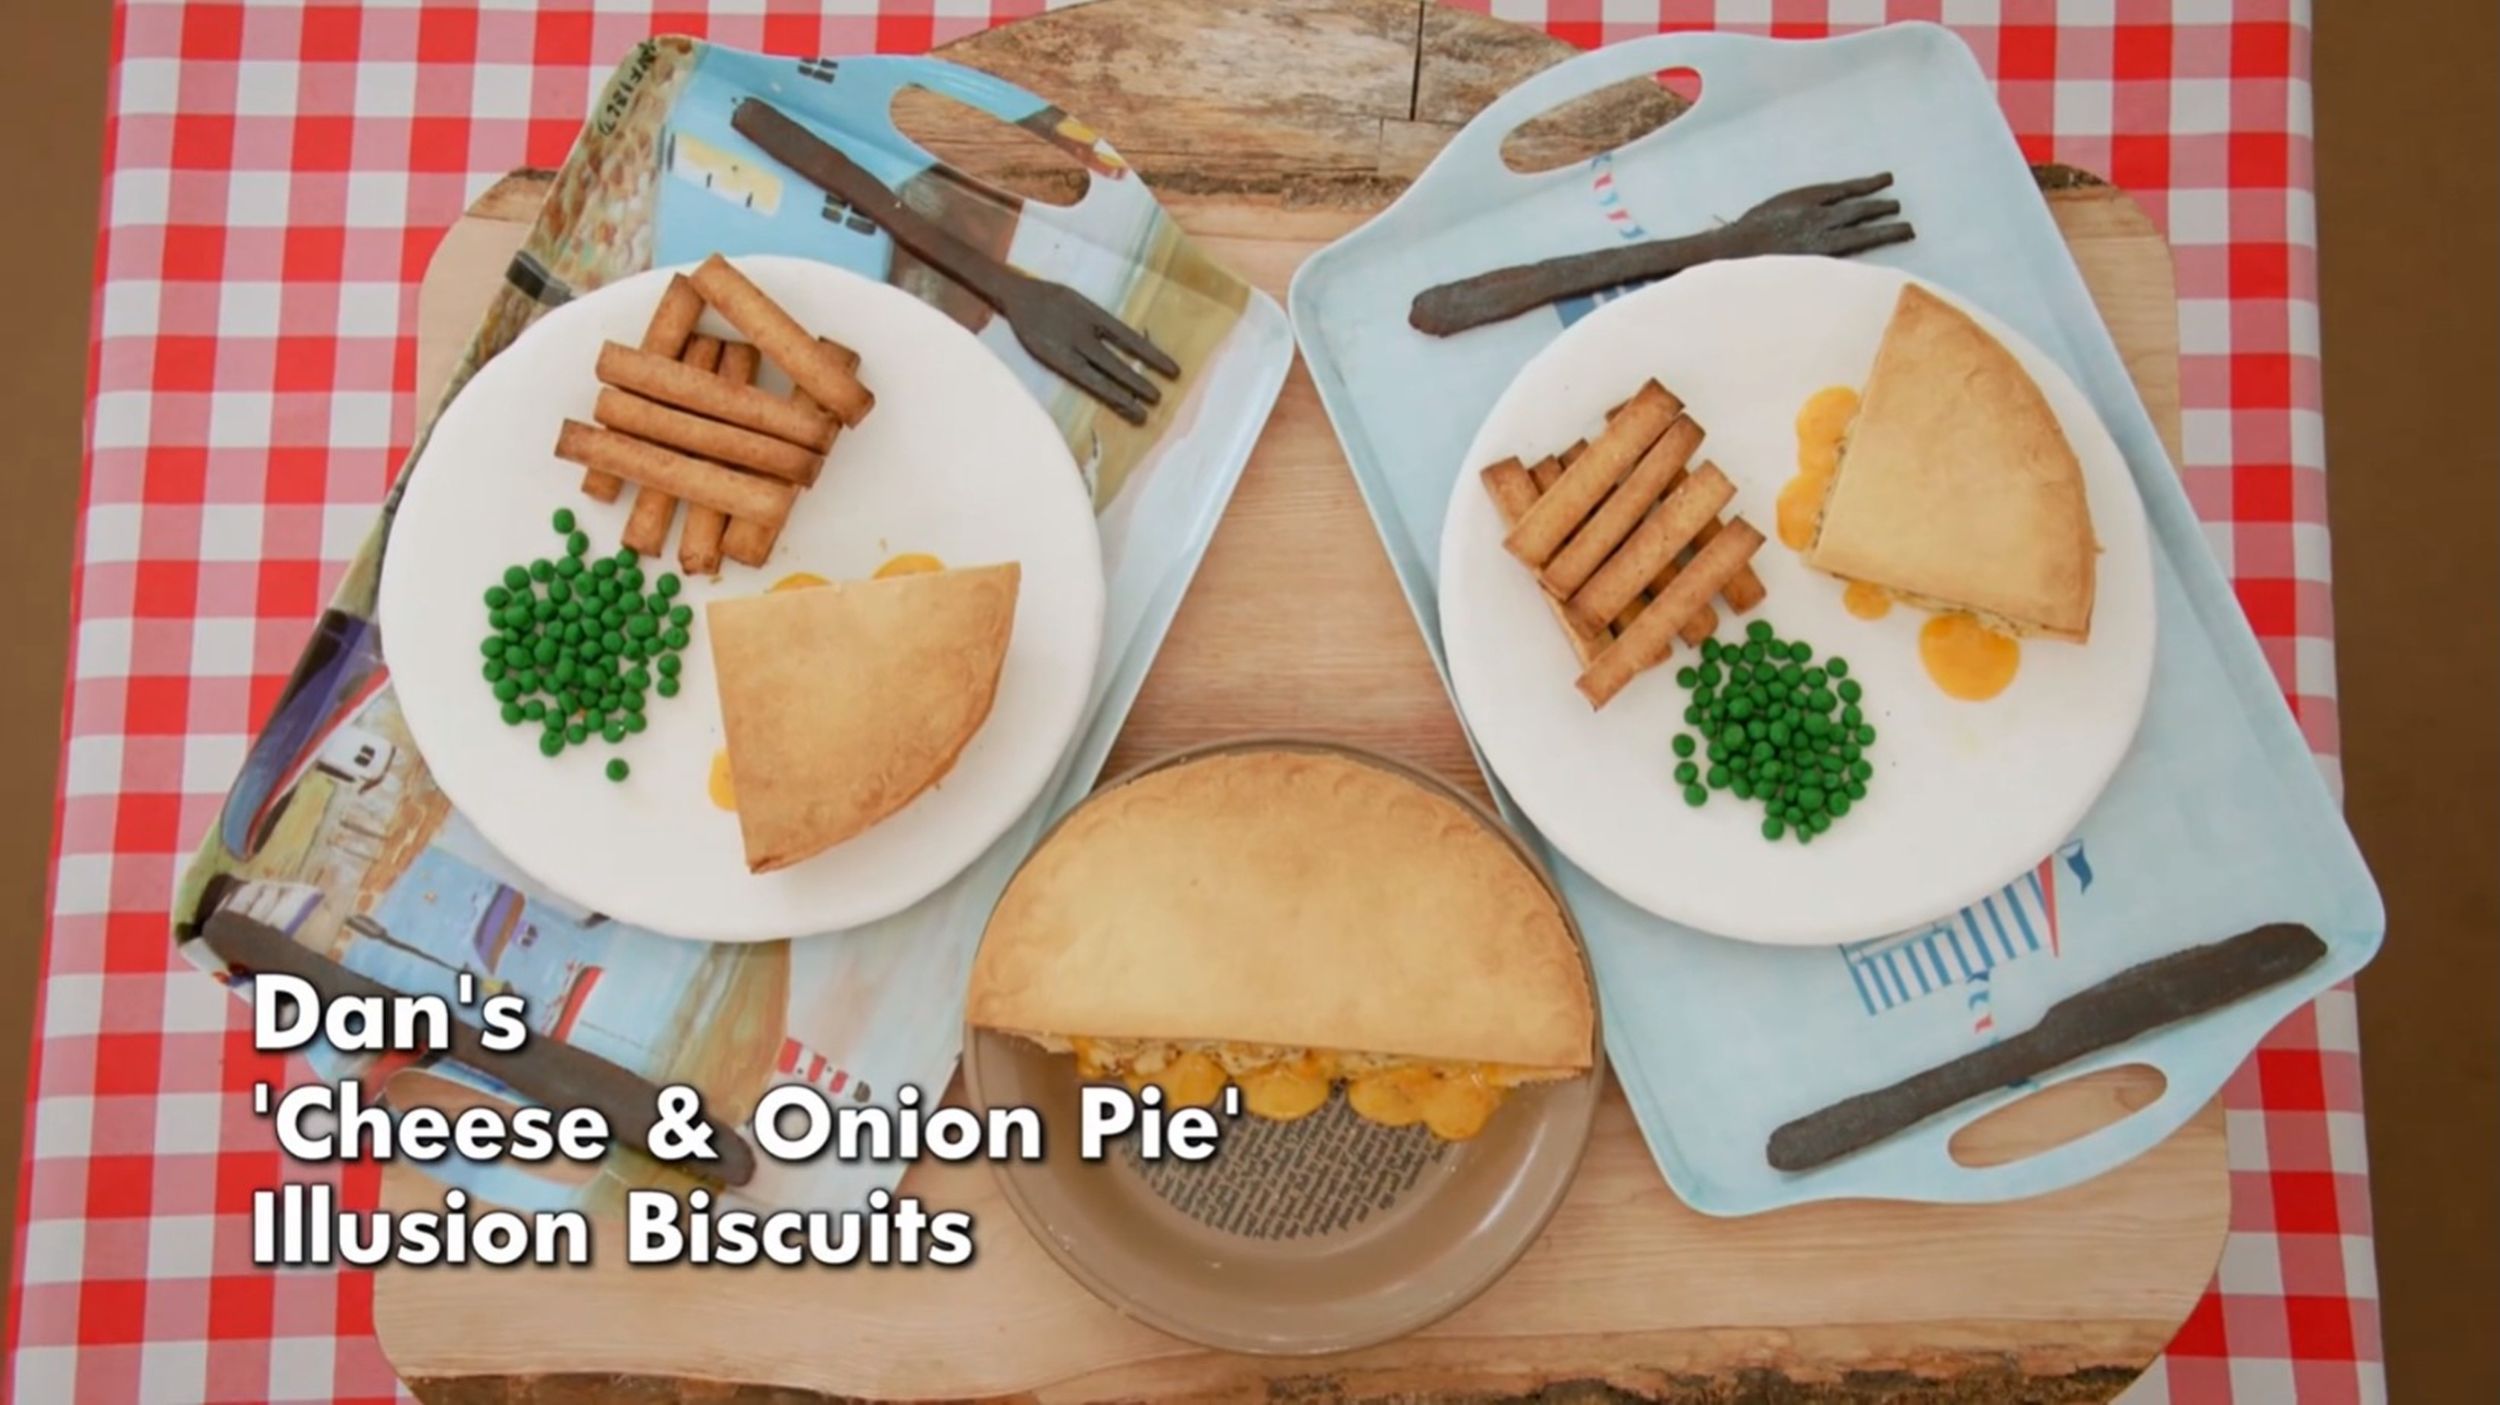 Dan’s Cheese & Onion Pie Illusion Biscuit Showstopper from 'The Great British Baking Show' Season 14's Biscuit Week